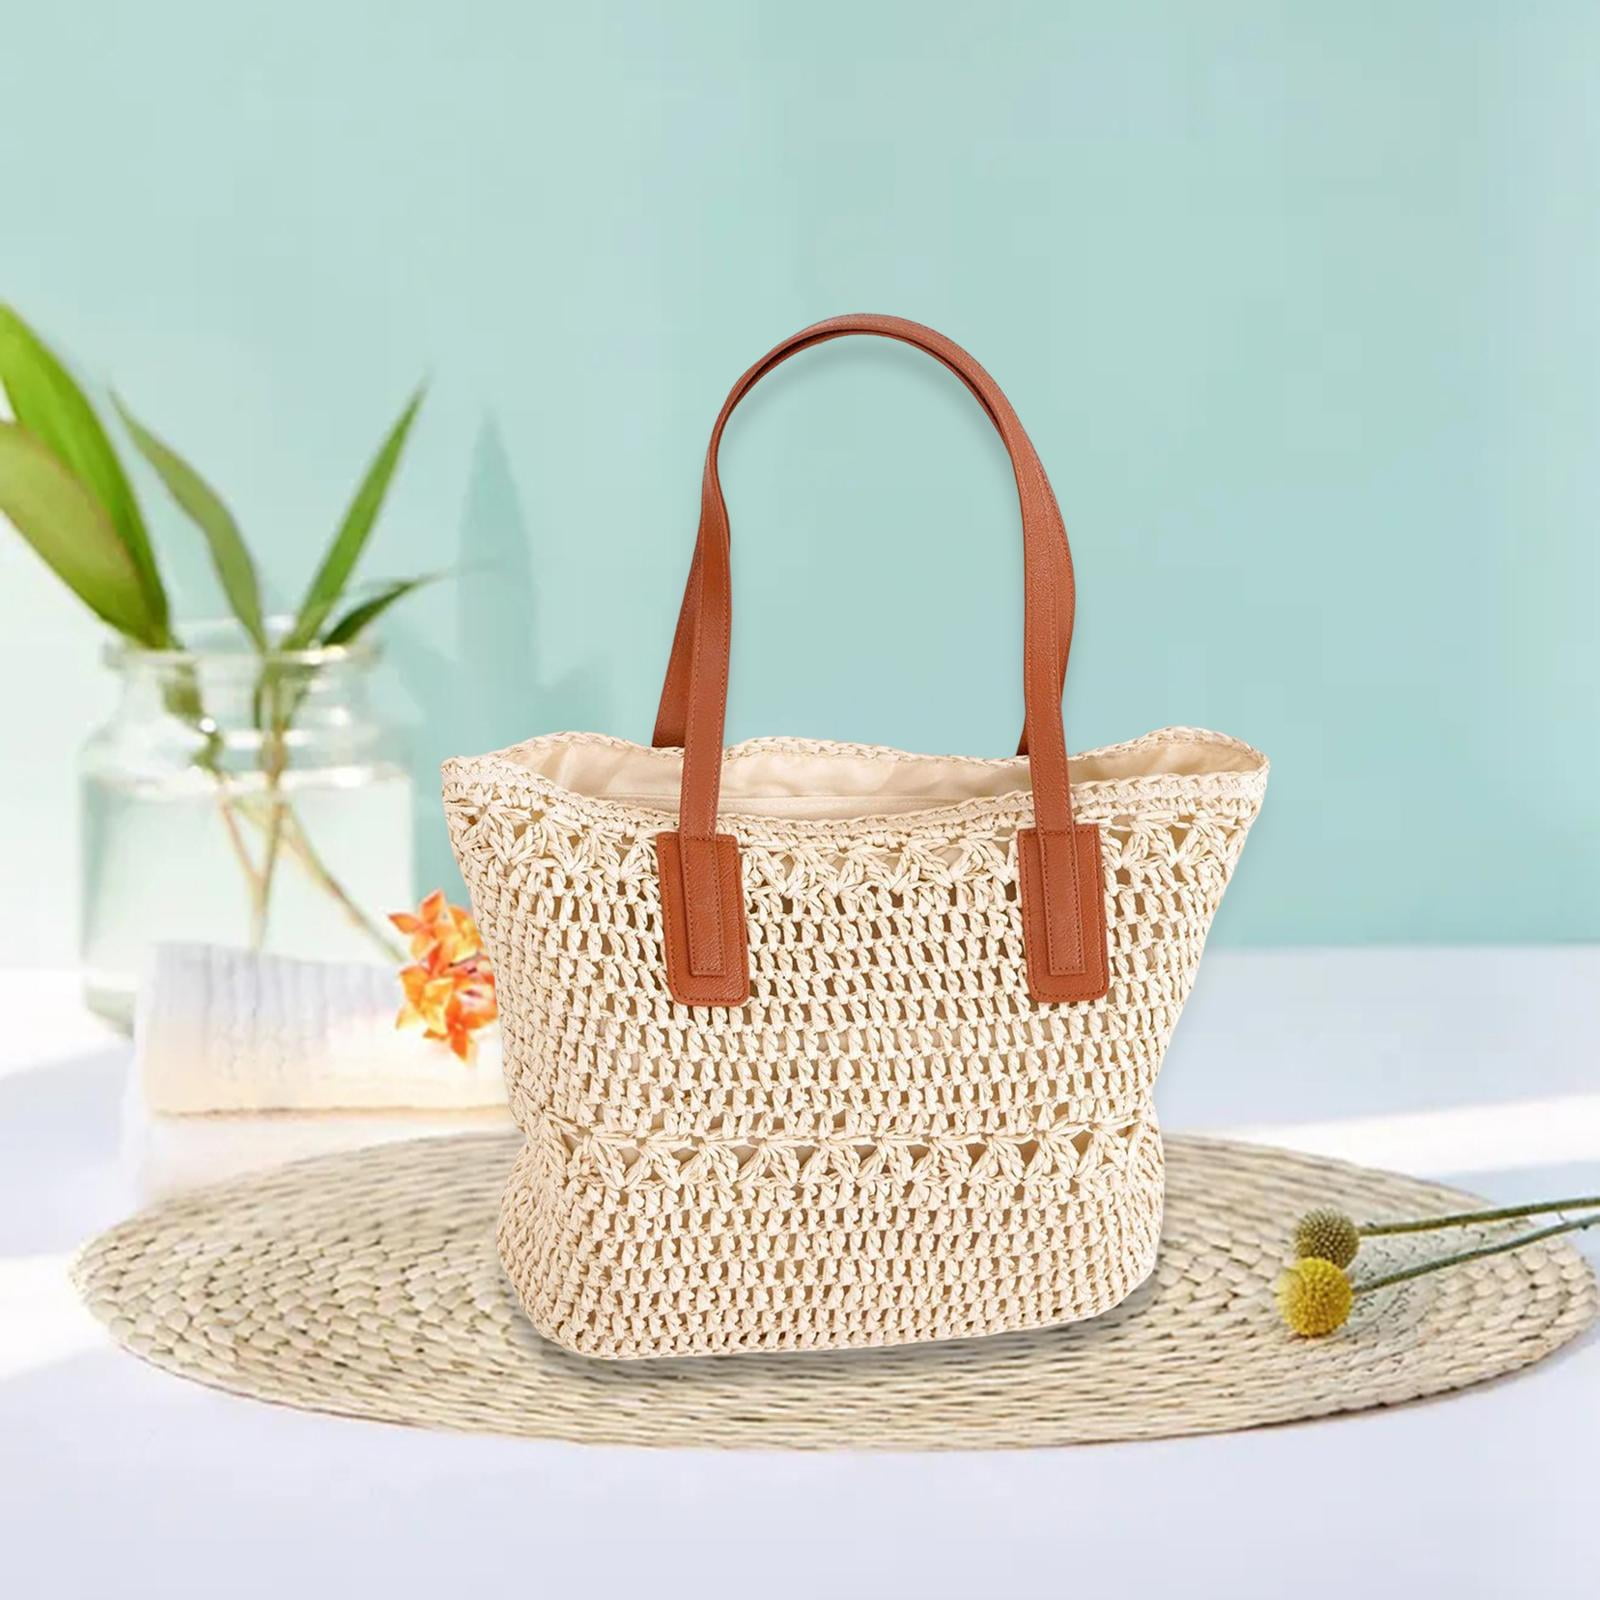 Chic Chic Large Straw Bucket Bag Straw Woven Shoulder Bag Boho Style Woman Purse  Bag Gift for Her Straw Purse for Travel - Etsy